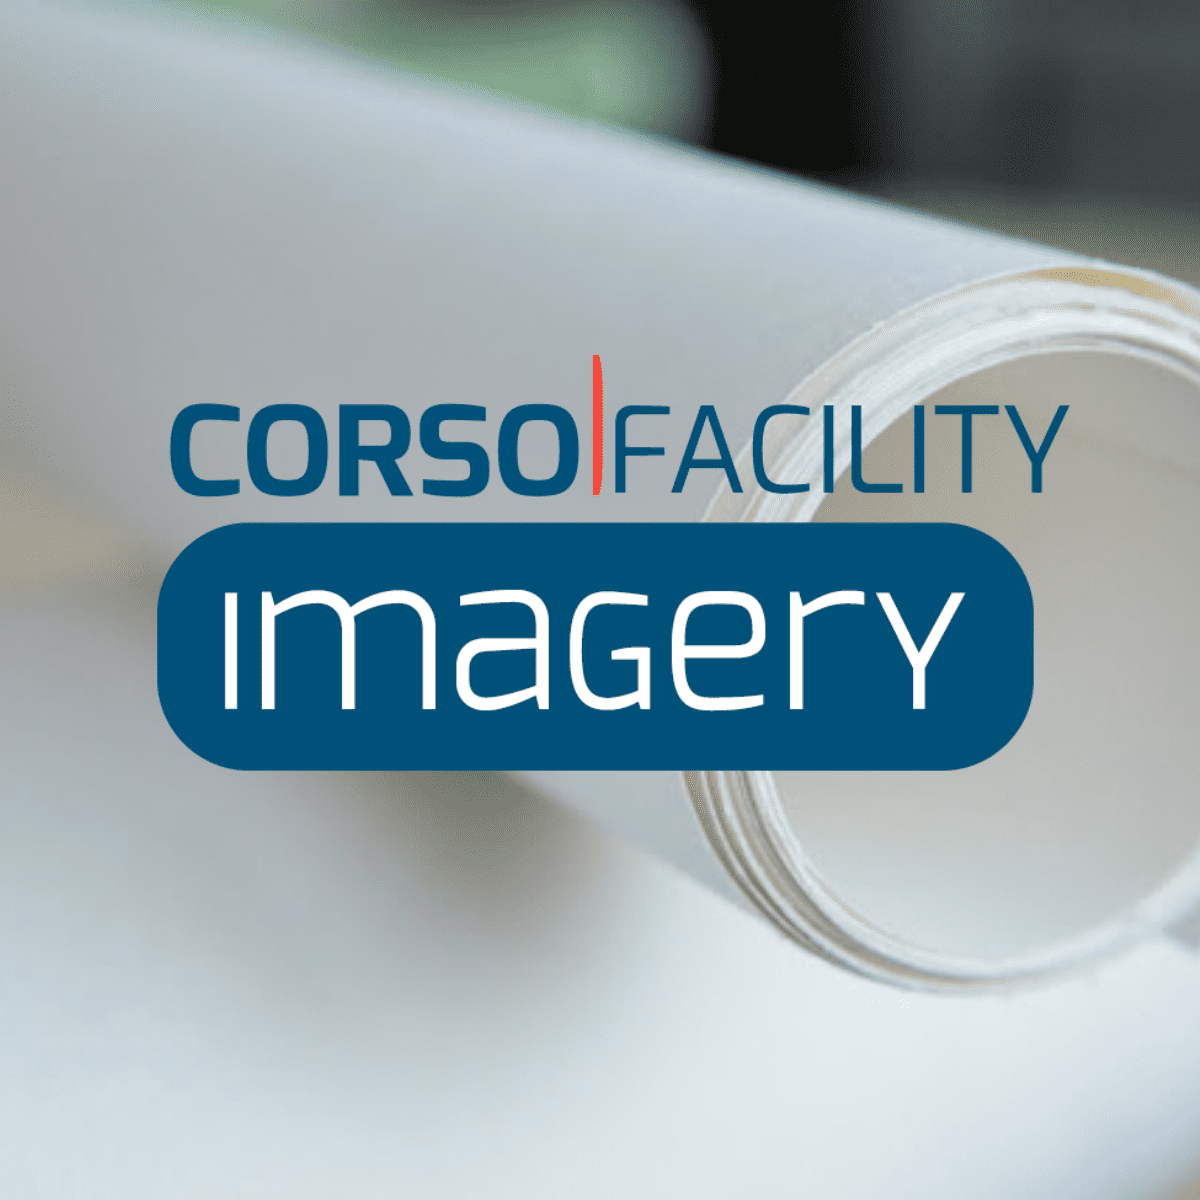 Installation of CorsoFacility Imagery in Adagio hotel rooms, Installation of CorsoFacility Imagery in Adagio hotel rooms